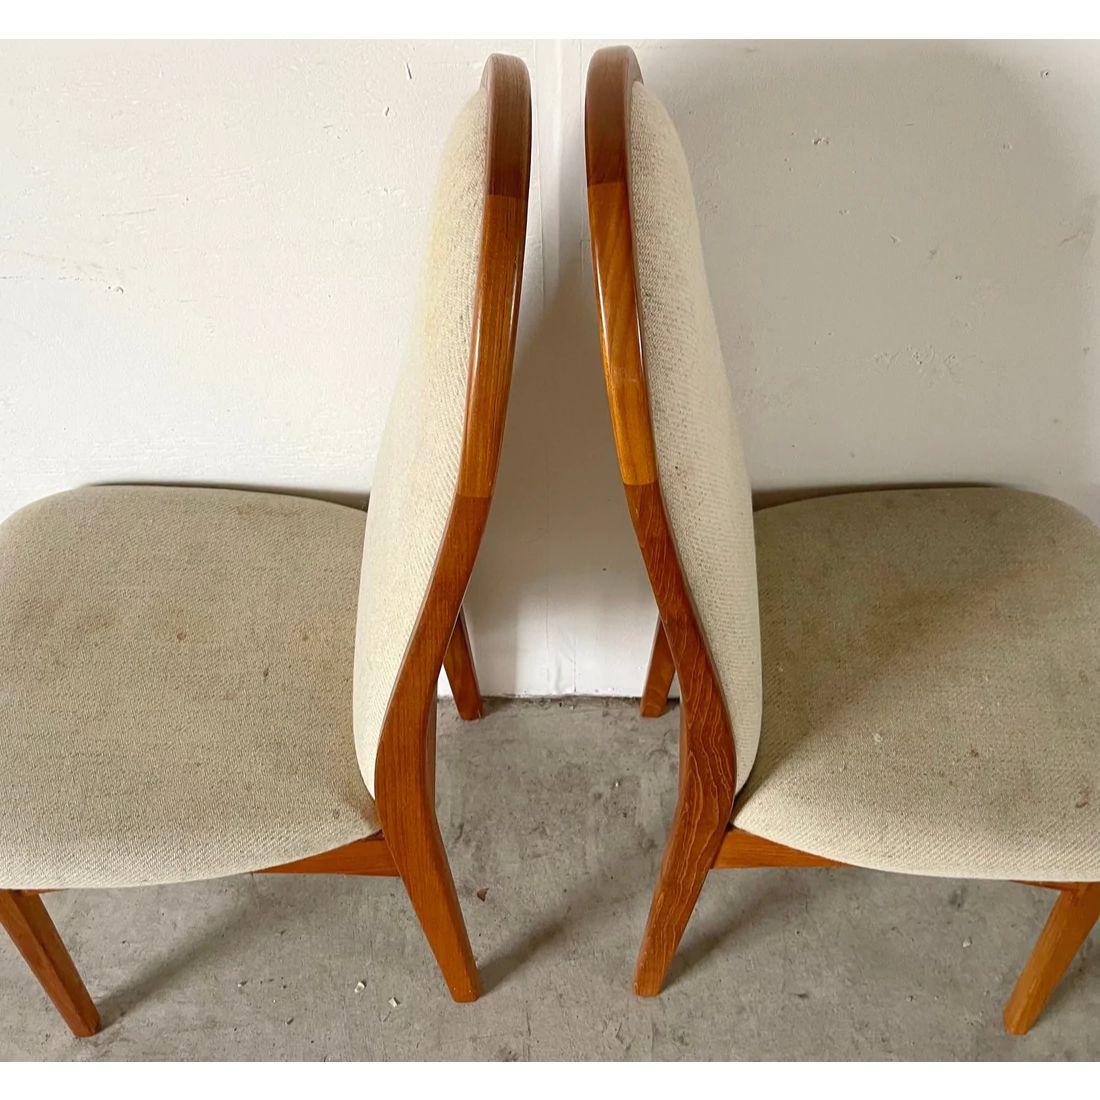 20th Century Vintage Modern High-back Teak Dining Chairs, Set of Five